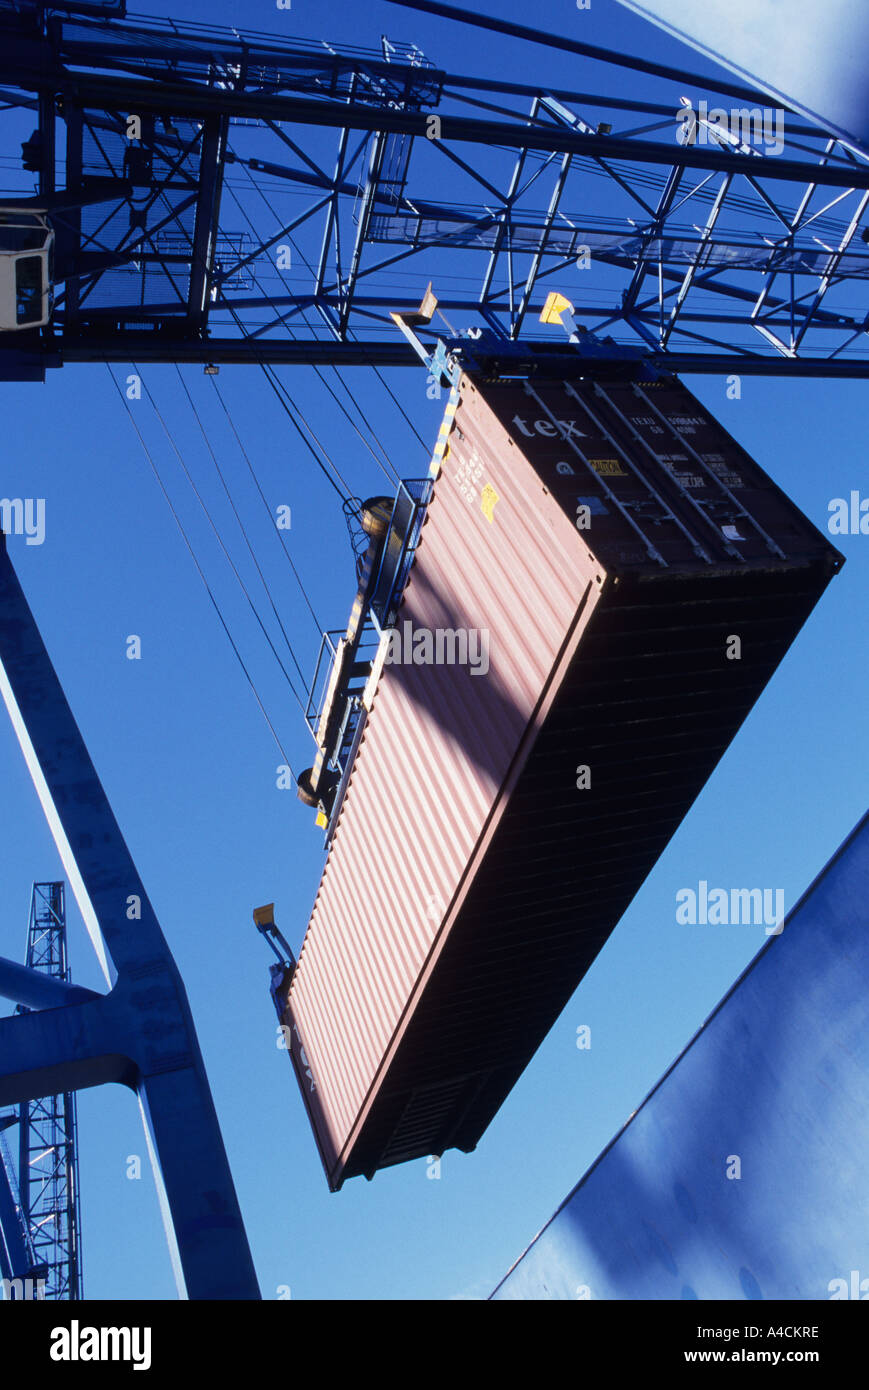 Loading container onto freighter Stock Photo